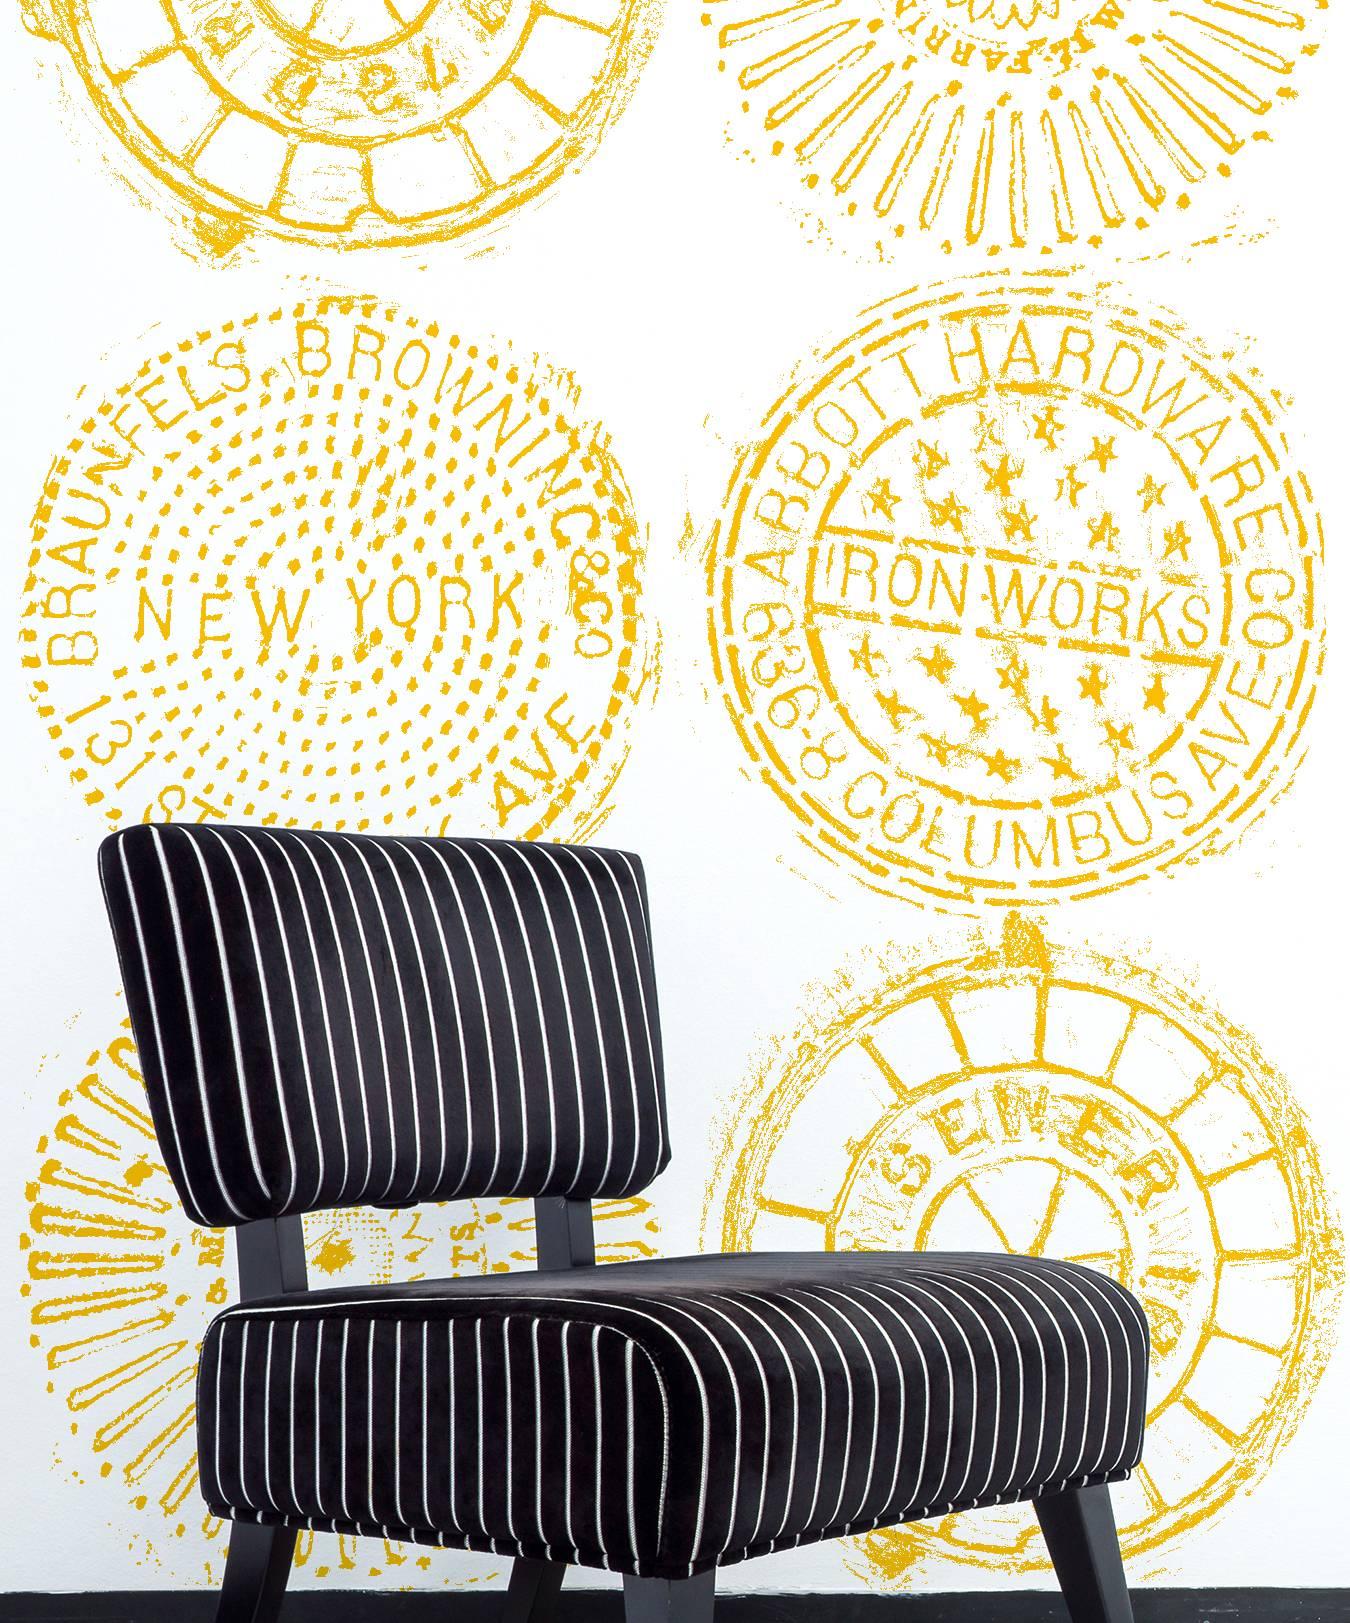 NYC Manhole Printed Wallpaper, White on Black Manhole Cover For Sale 1